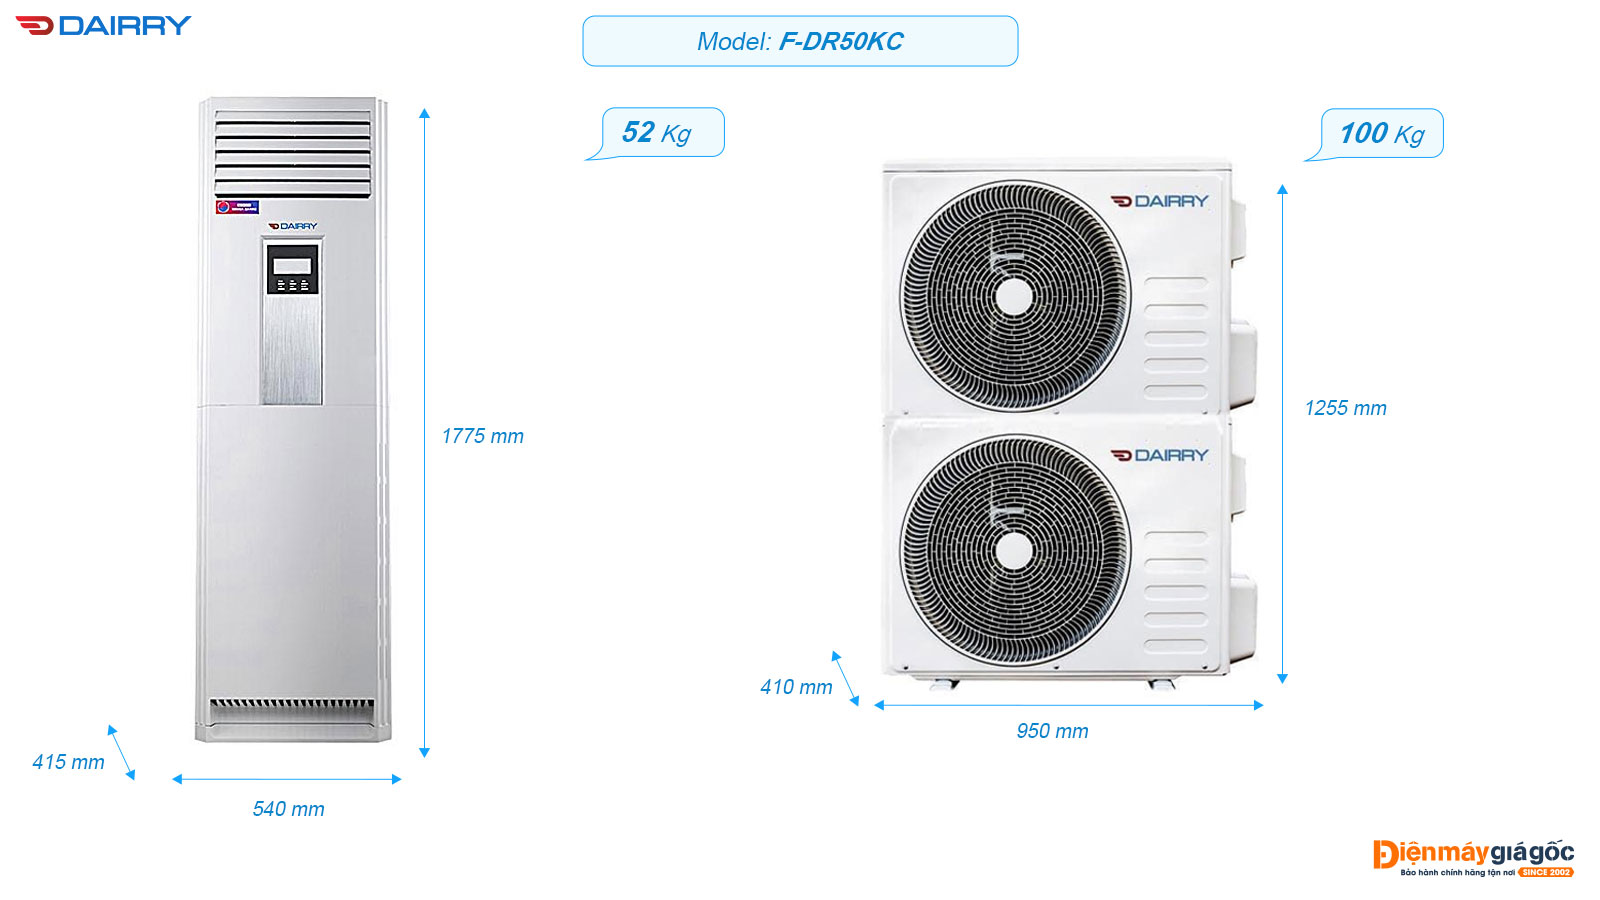 Dairry floor standing air conditioning F-DR50KC (5.0Hp)